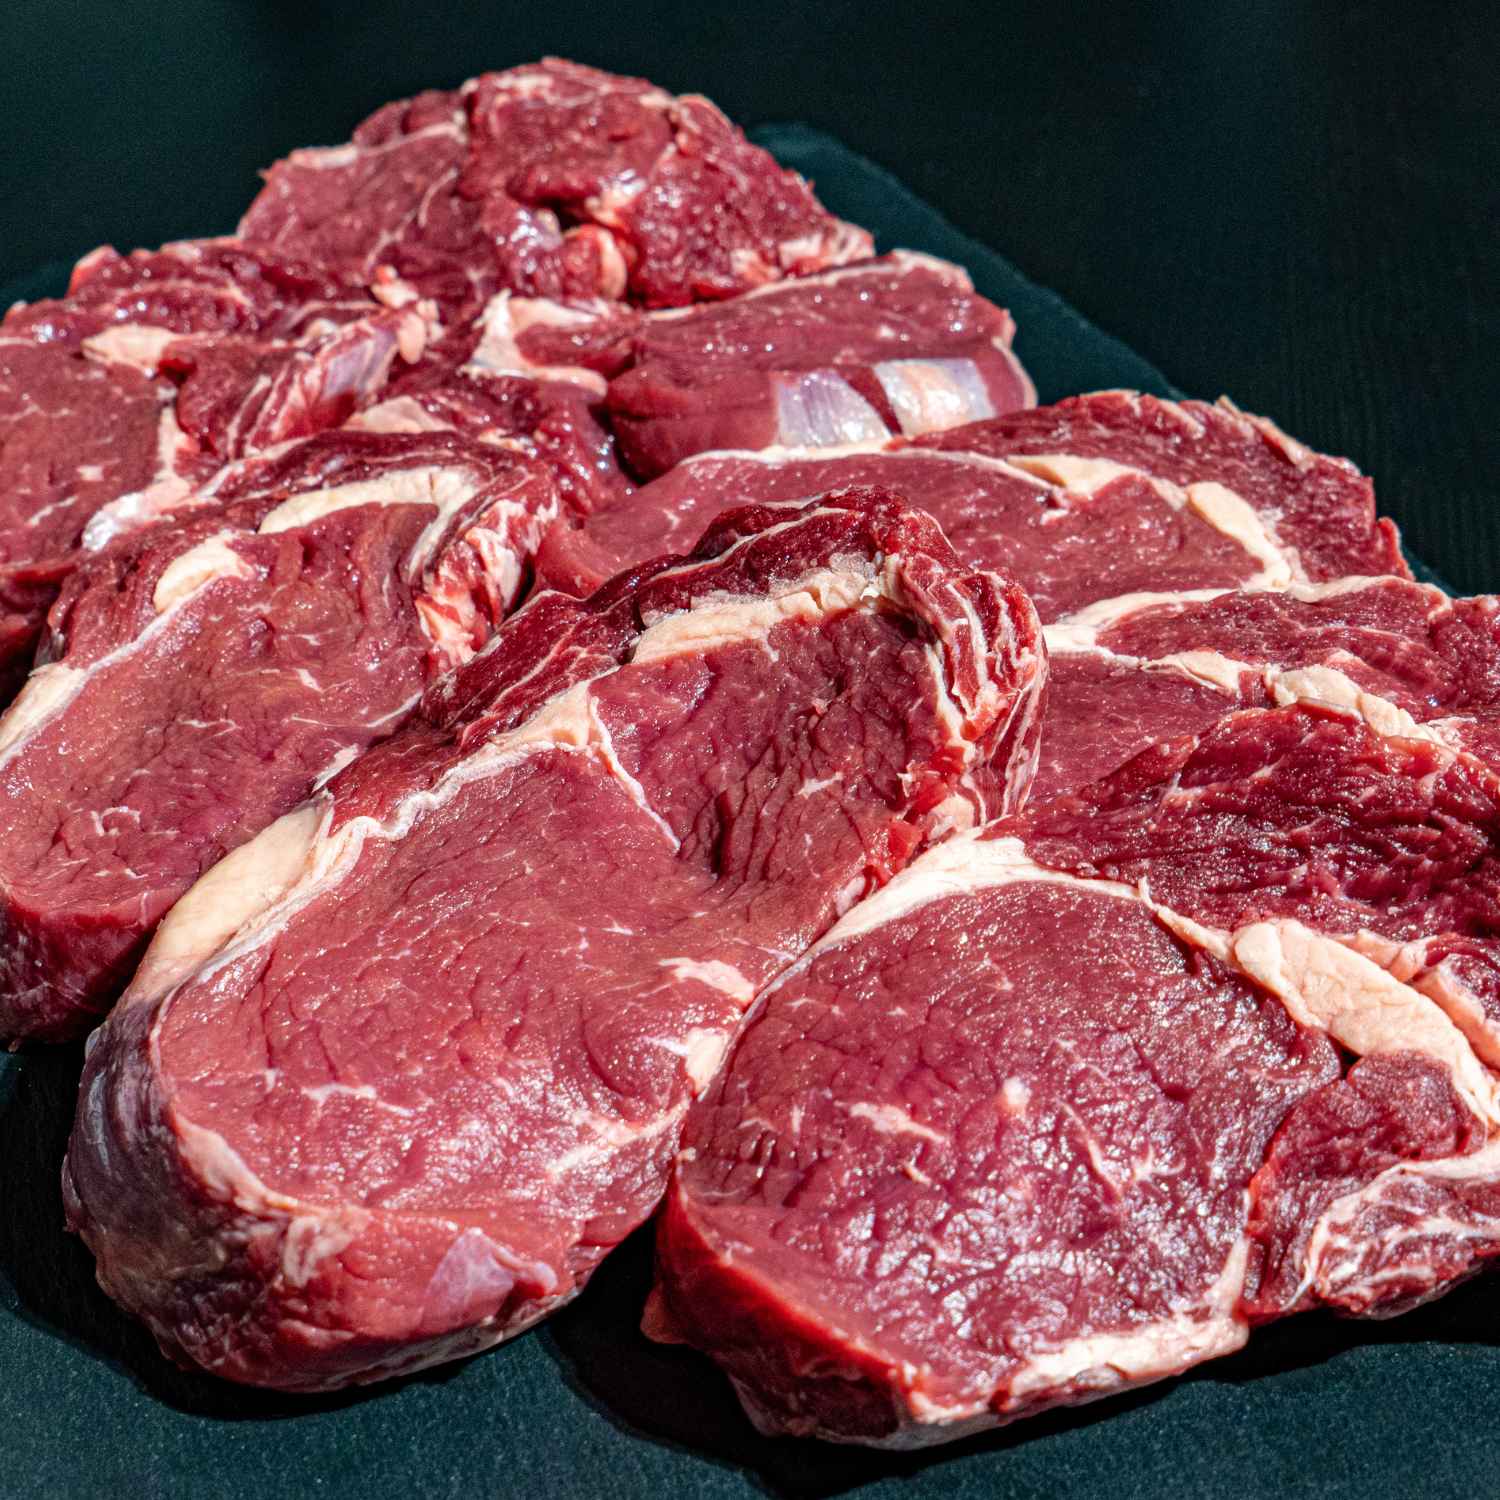 Juicy and Tender Grass-Fed Ribeye Steak - A Flavorful Delight from Meat King